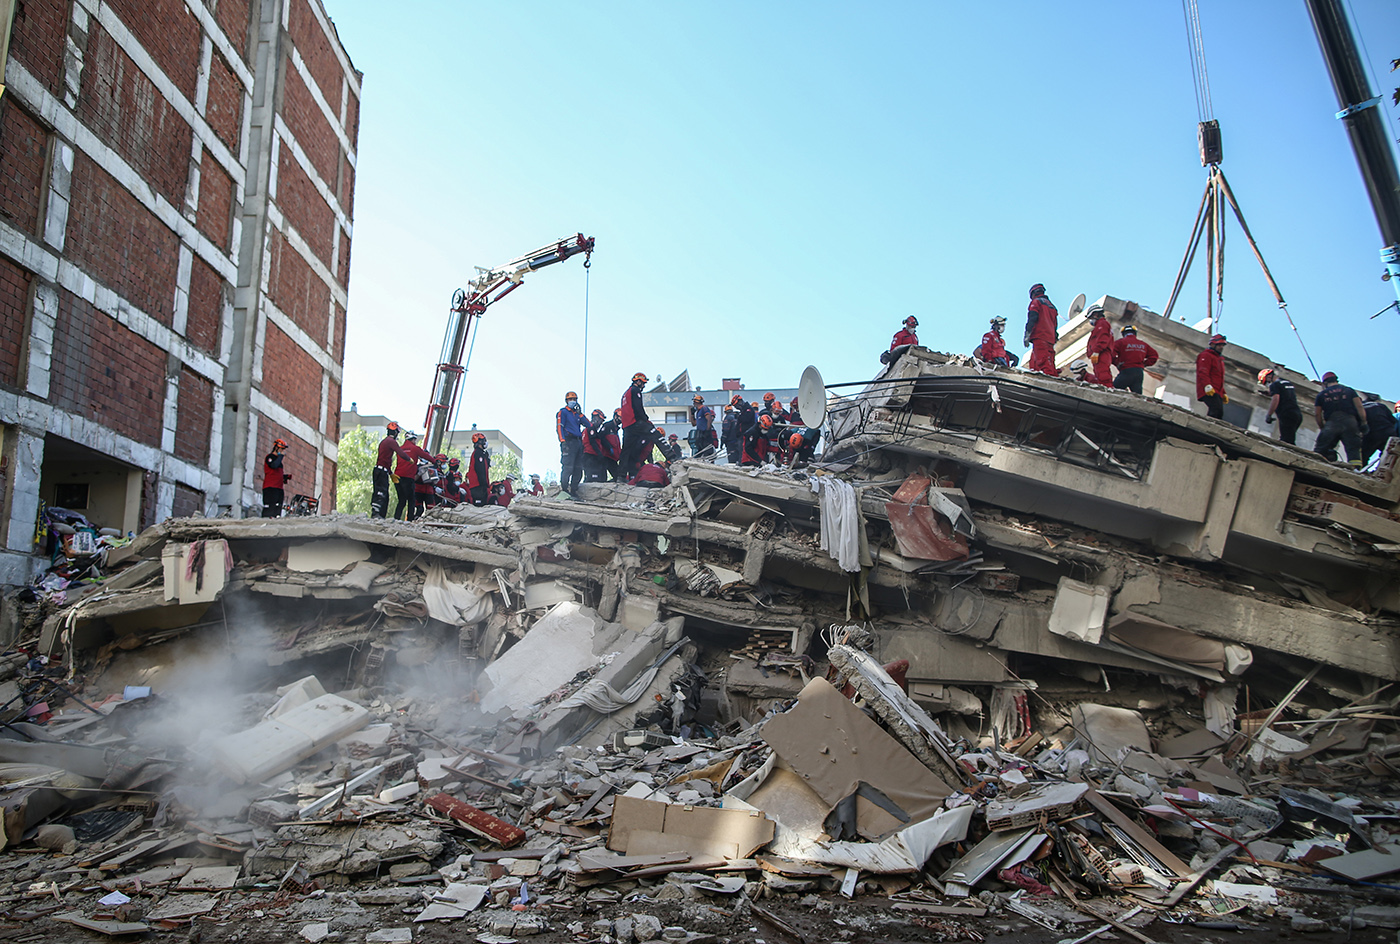 Rescue workers and people search for survivors at a collapsed building after a 7.0 magnitude earthquake in the Aegean Sea, at Bayrakli district in Izmir, Turkey, 31 October 2020. According to Turkish media reports, at least twenty six four people died while more than eight  hundreds were injured and dozens of buildings were destroyed in the earthquake.